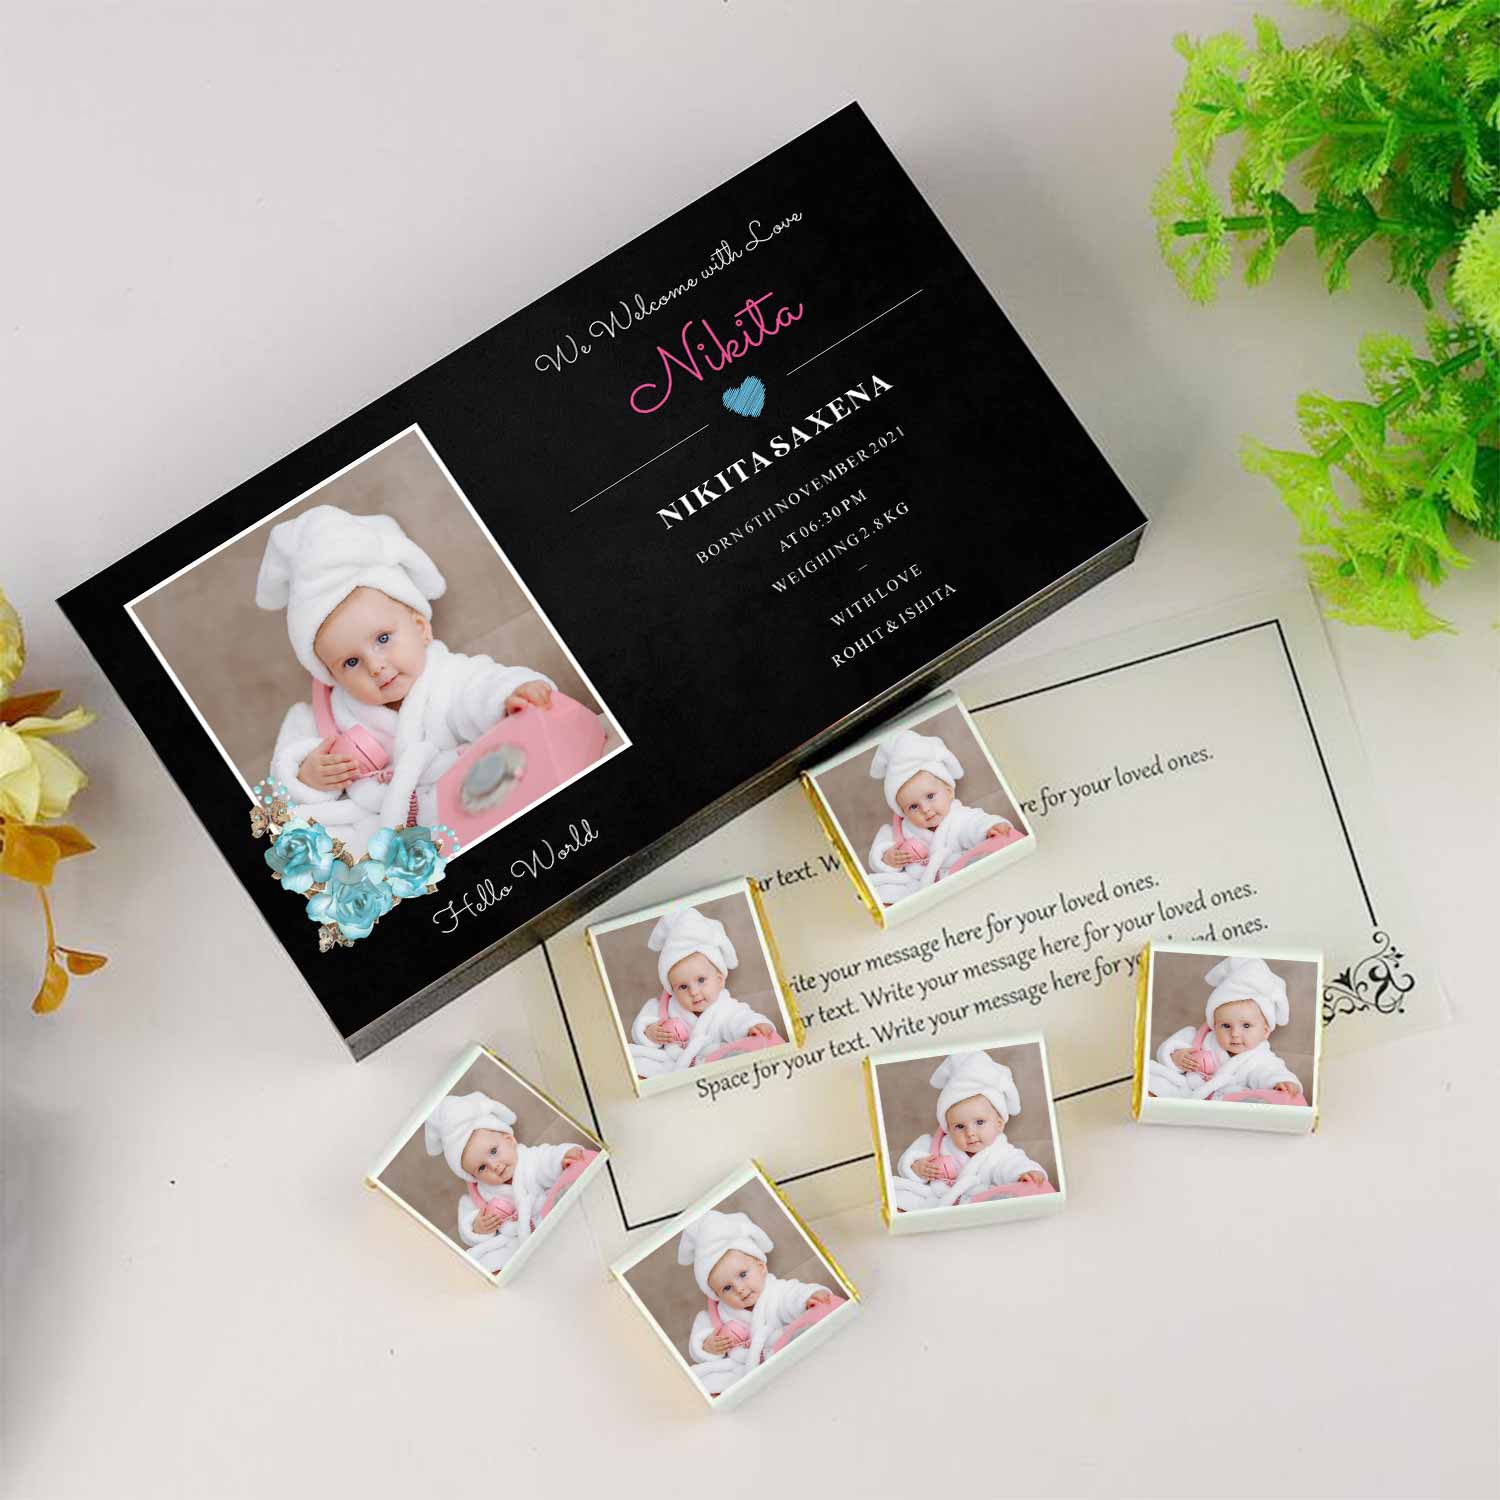 Its a baby girl announcement.     New born baby girl announcement.  Pregnancy baby girl announcement.   Baby birth announcement gifts india.